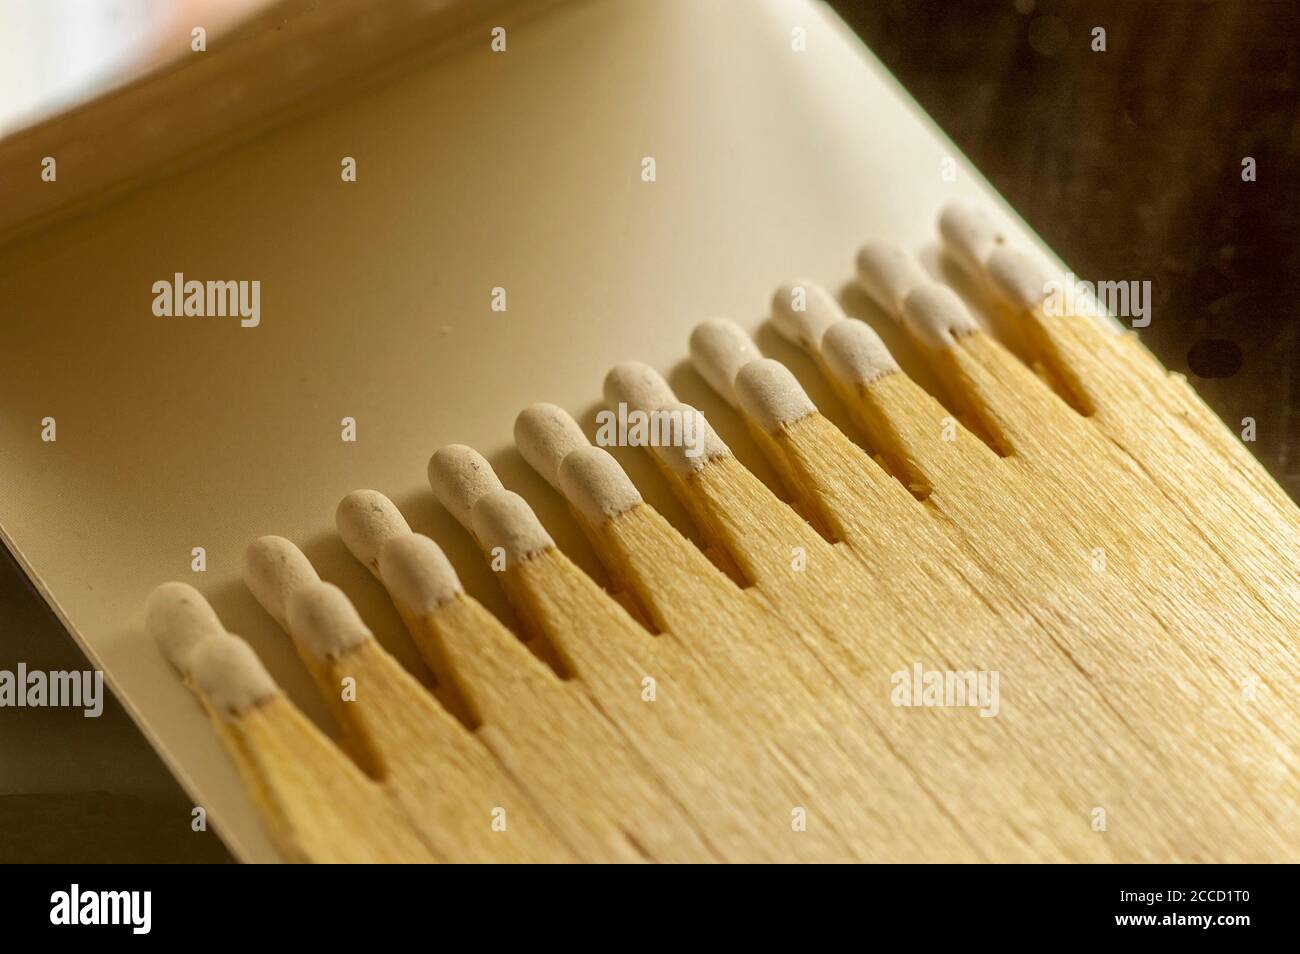 macro shoot of advertising wooden matches with a head of white phosphorus in the matchbook. natural light Stock Photo